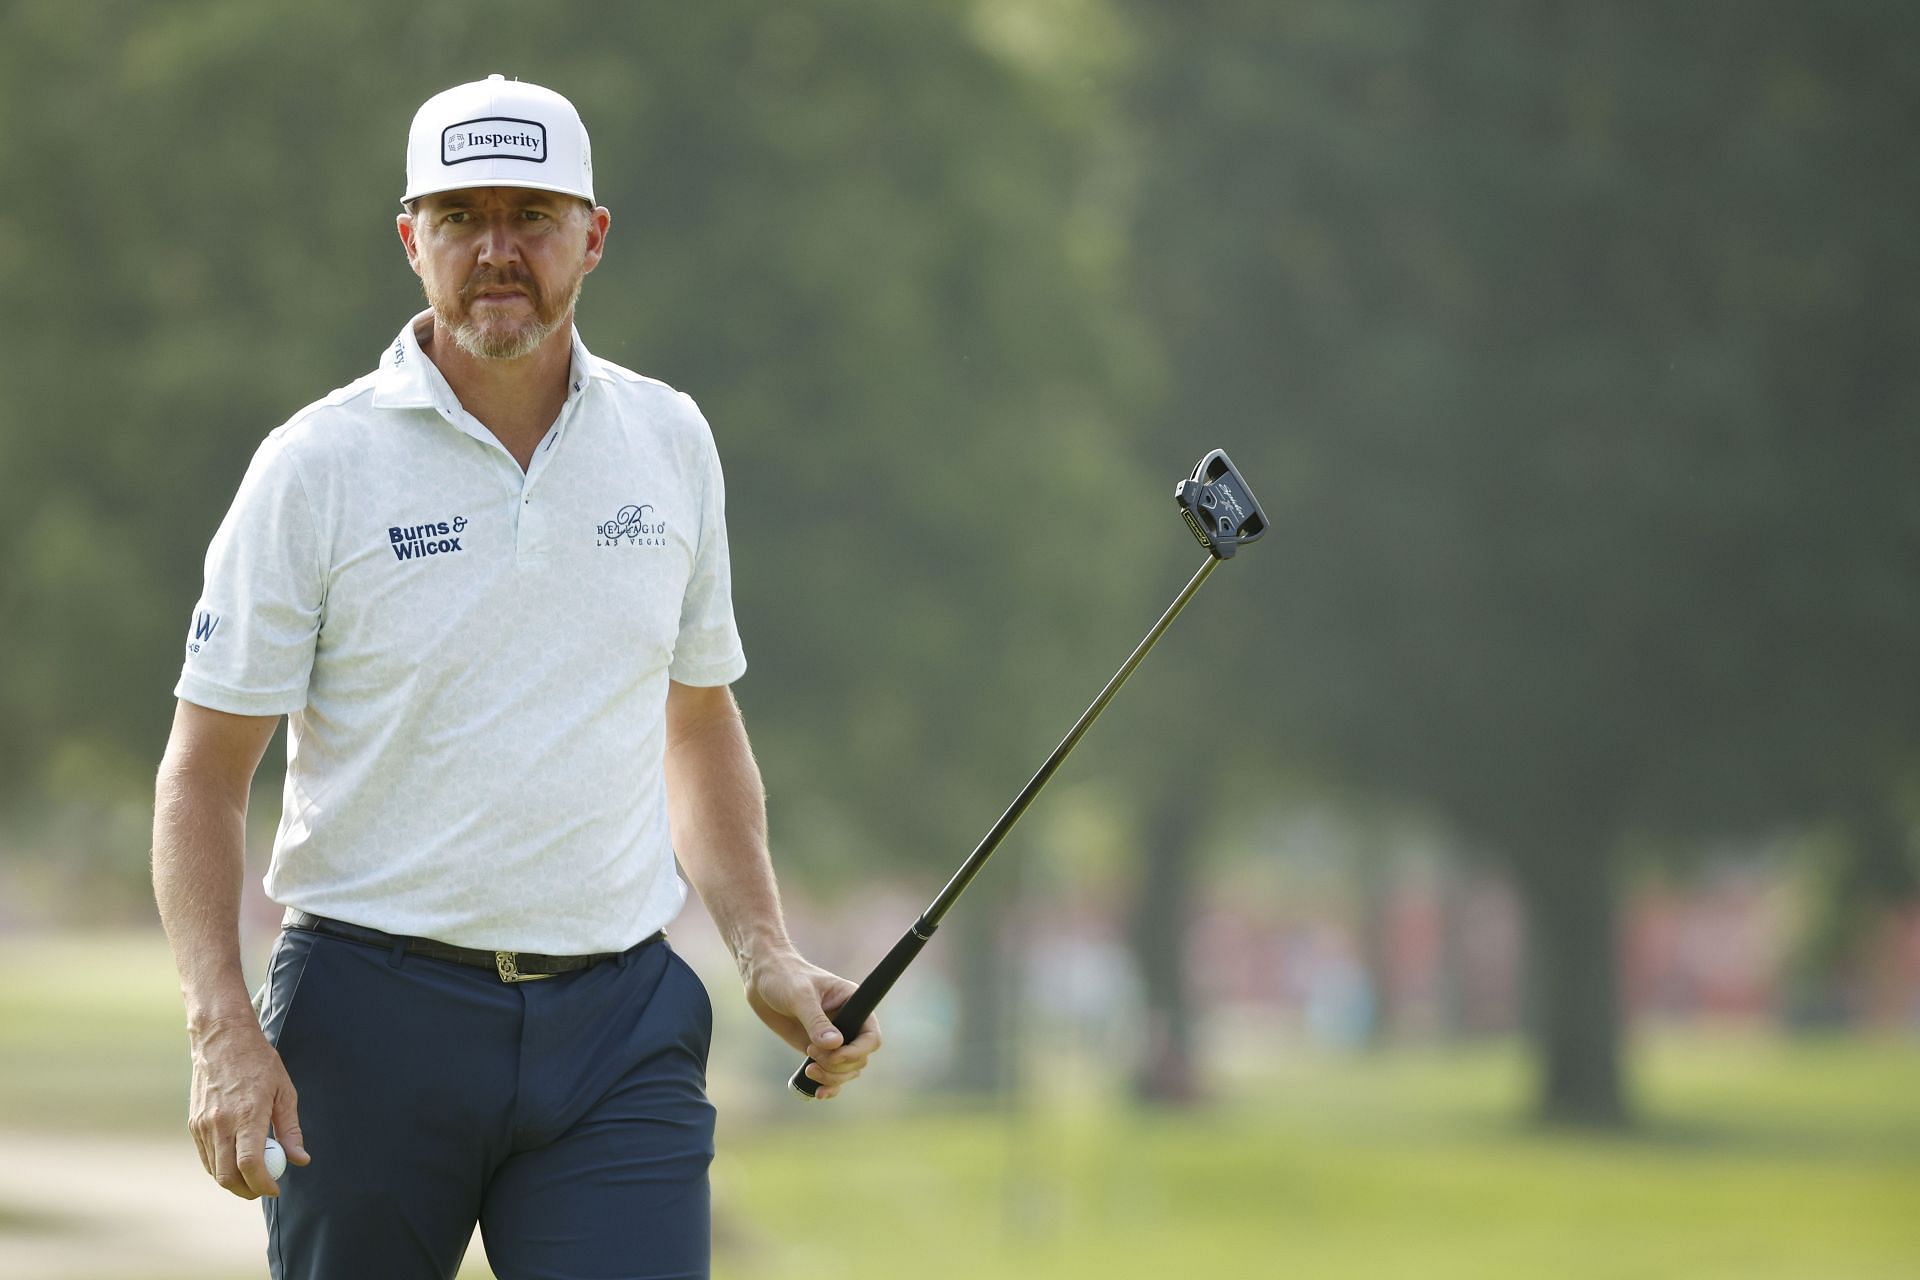 Jimmy Walker is not happy with the PGA Tour to cut short FedEx Cup field to 70 players only